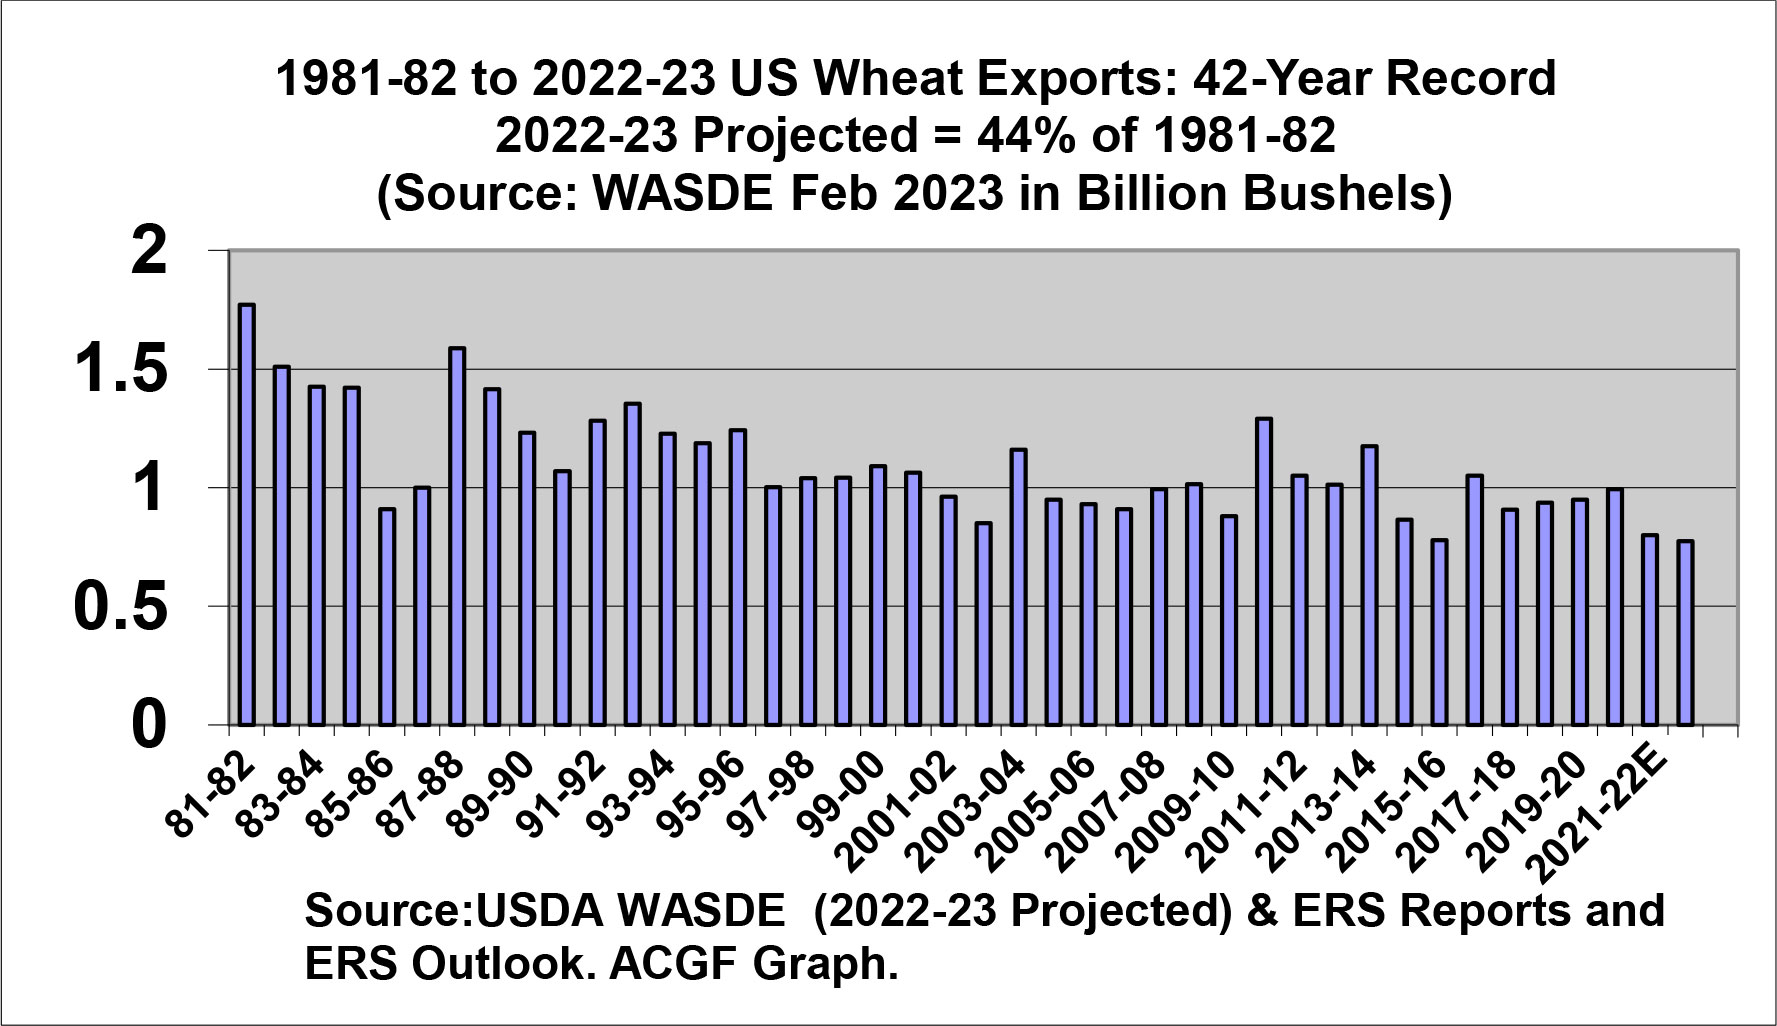 1981-82 to 2022-23 US Wheat Exports 42-Year Record 2022-23 Projected = 44% of 1981-82 (Source: WASDE Feb 2023 in Billion Bushels)